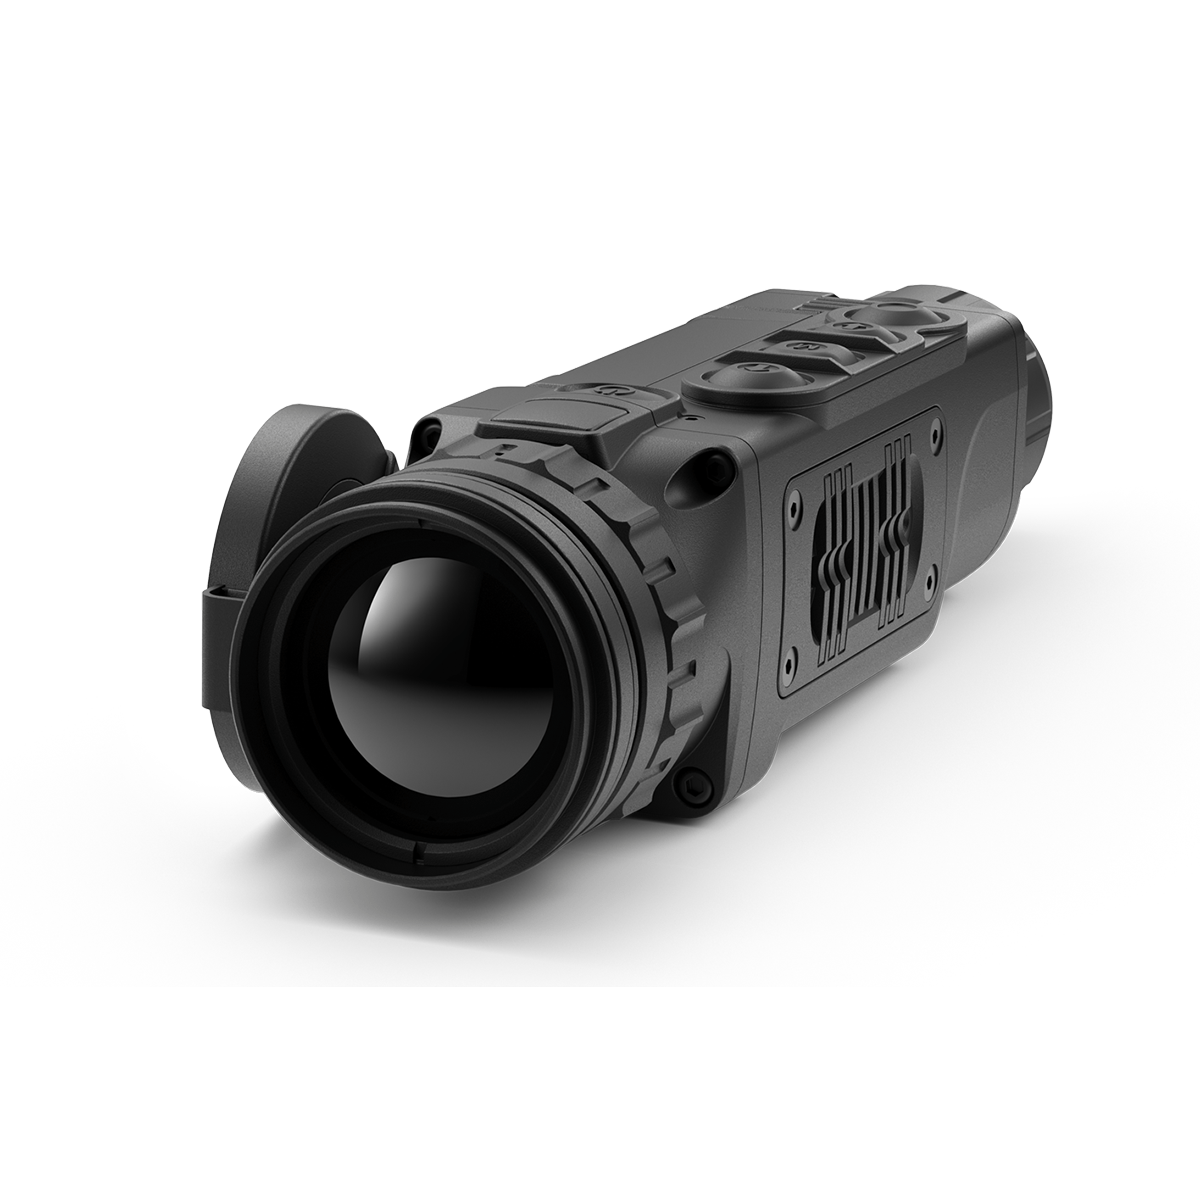 View the Thermal Monocular Collection by Pulsar USA